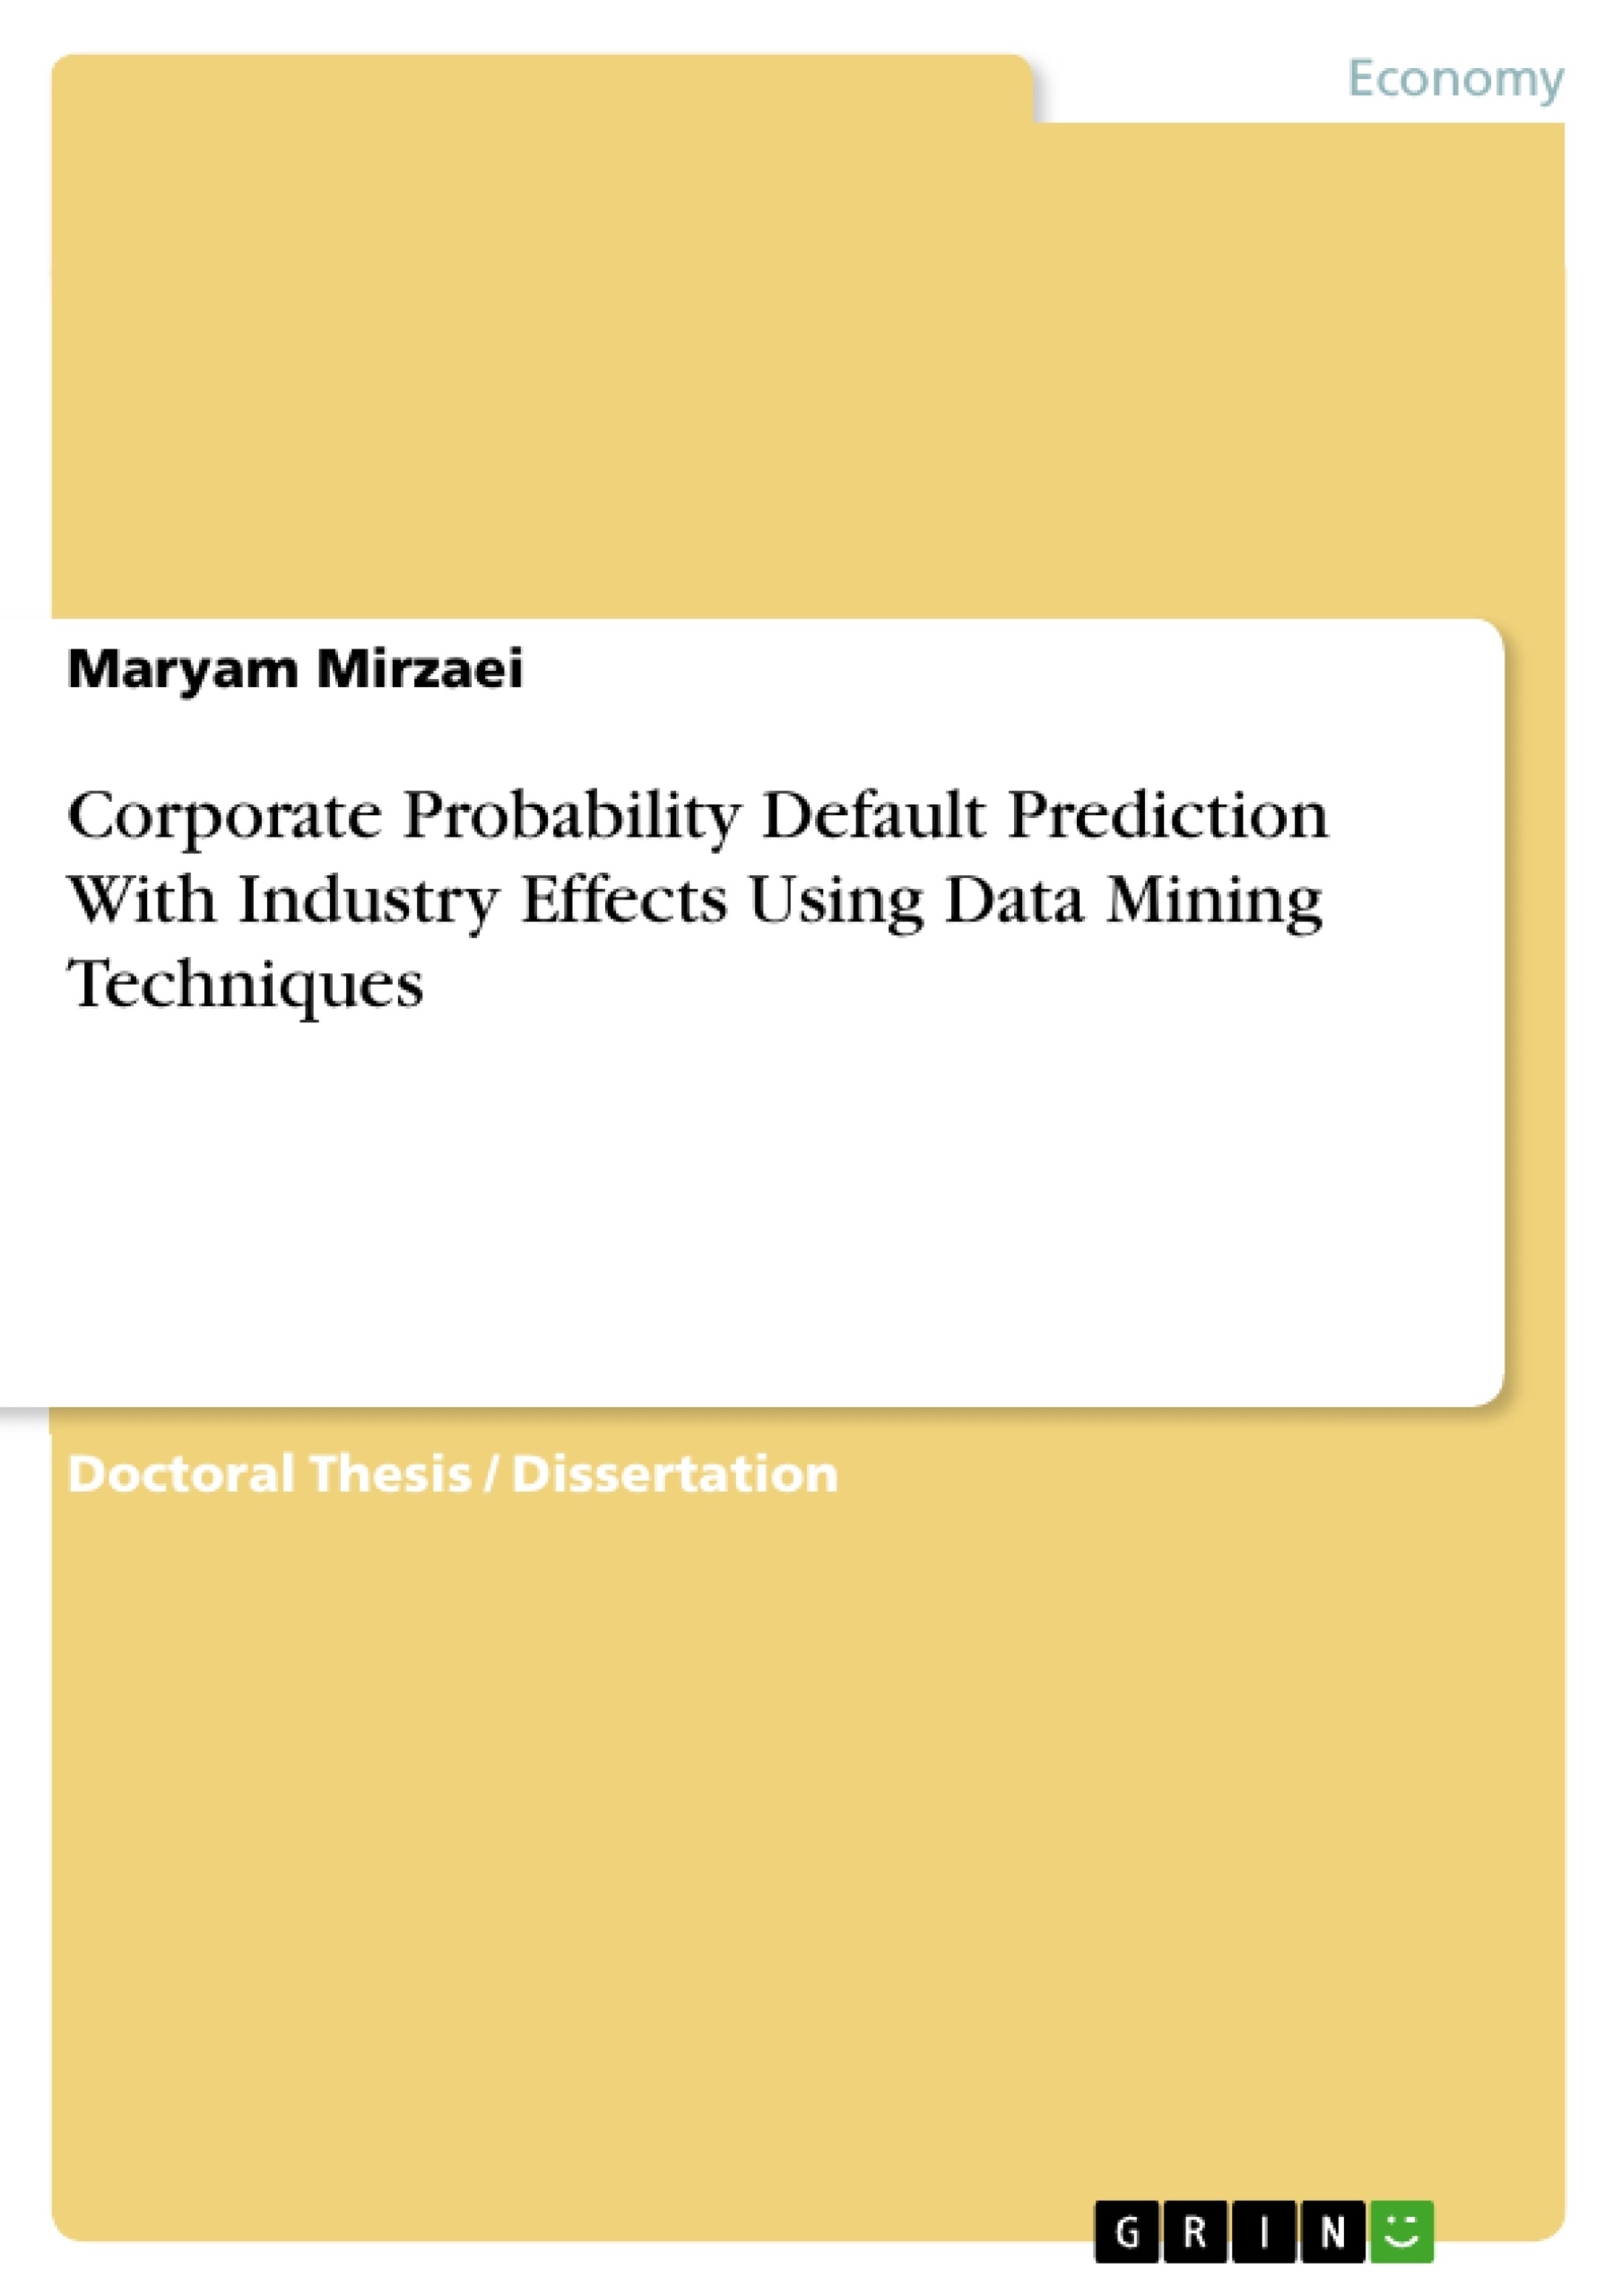 Título: Corporate Probability Default Prediction With Industry Effects Using Data Mining Techniques